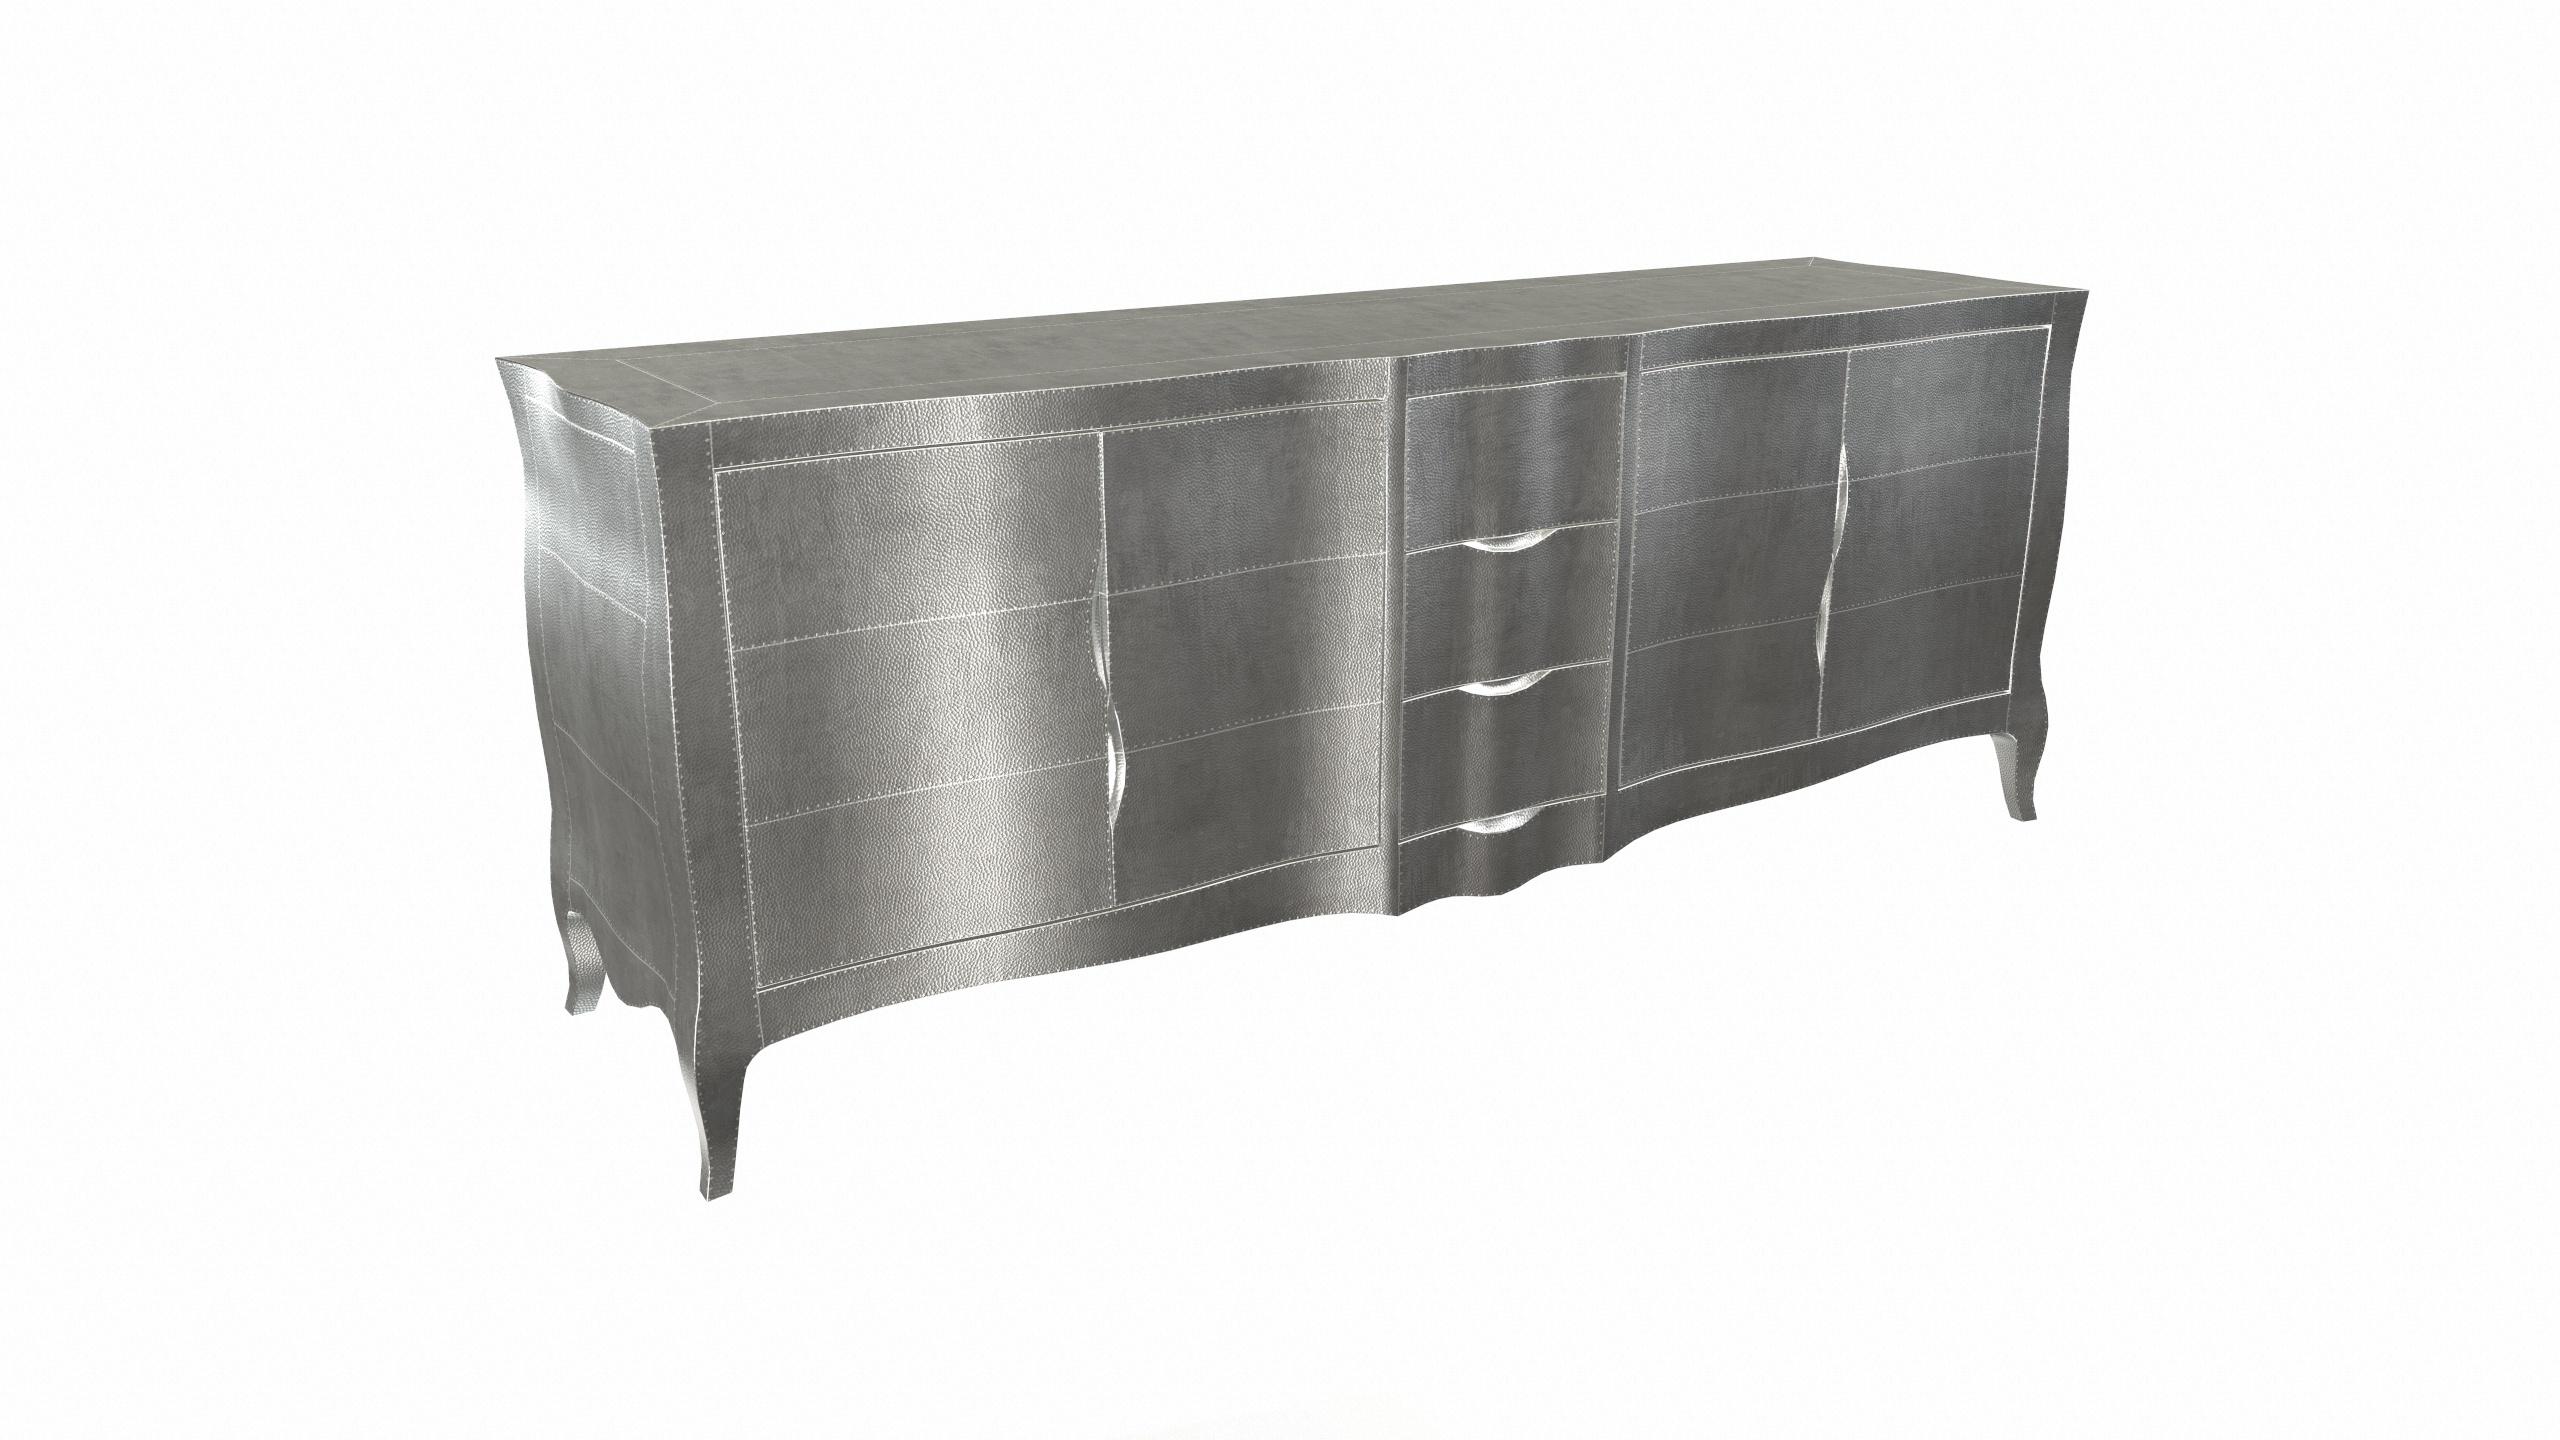 Contemporary Louise Credenza Art Deco Bookcases in Mid. Hammered White Bronze by Paul Mathieu For Sale